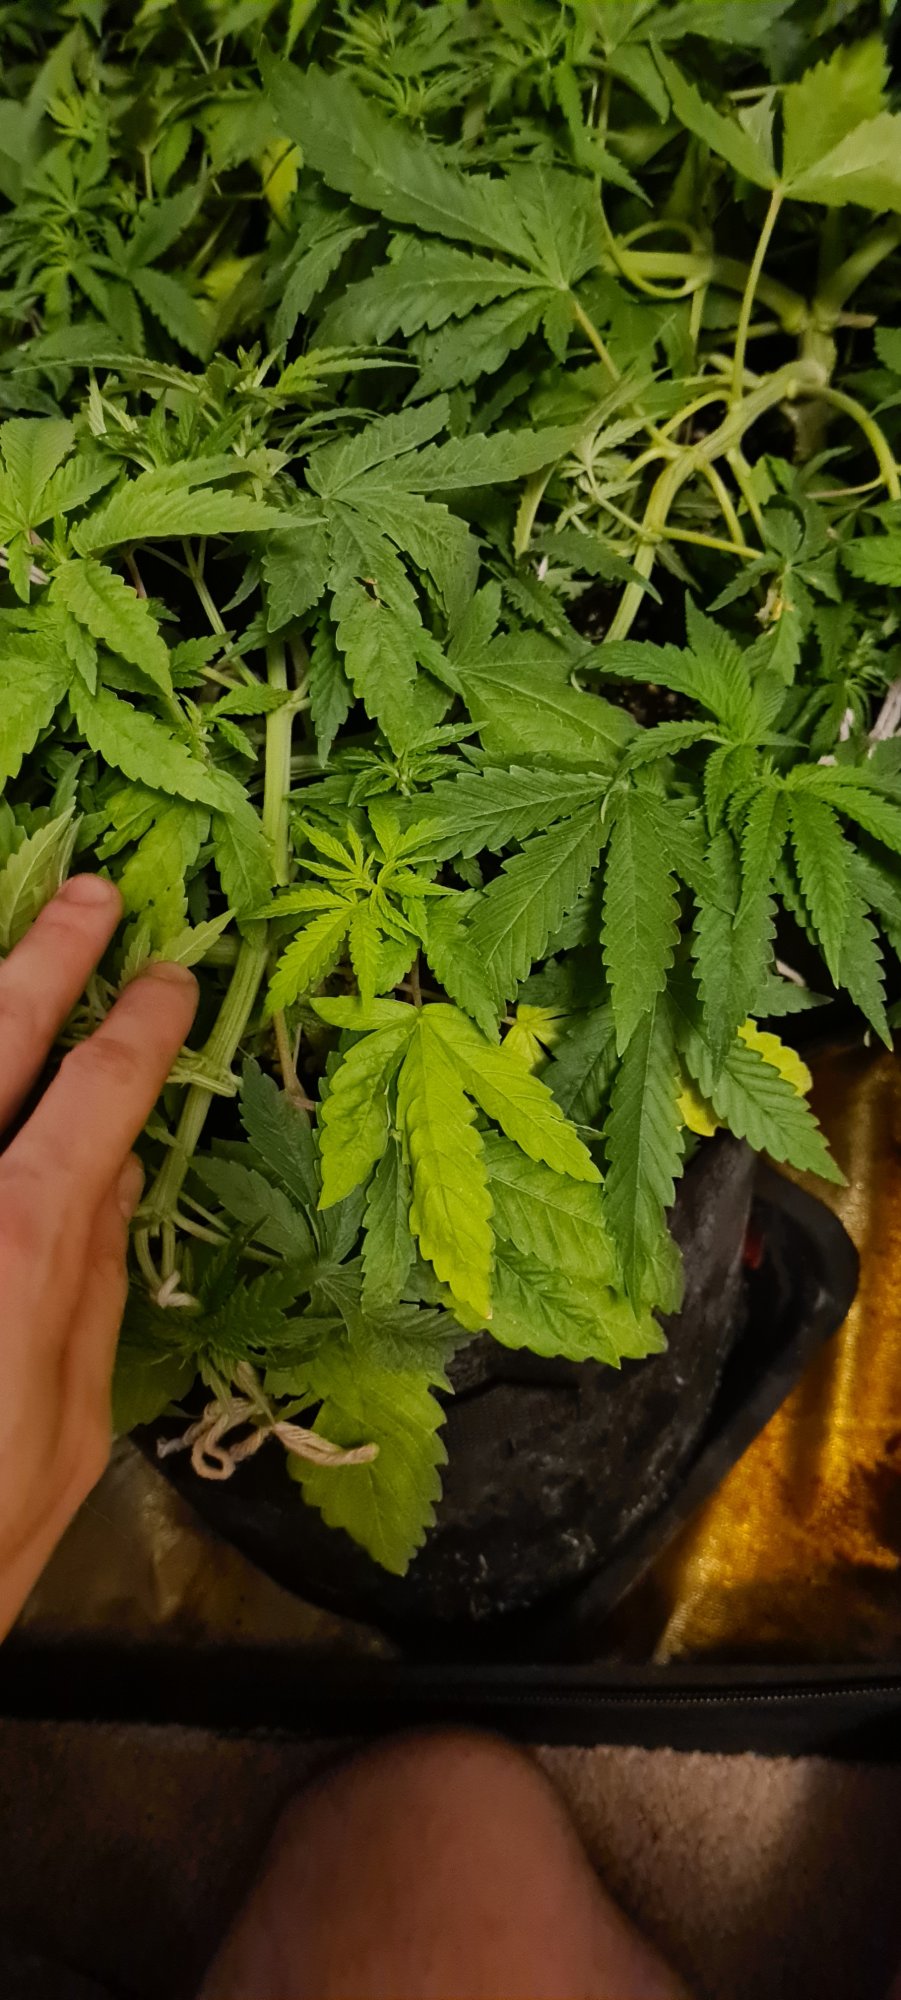 Is this nitrogen deficiency or other deficiency 2